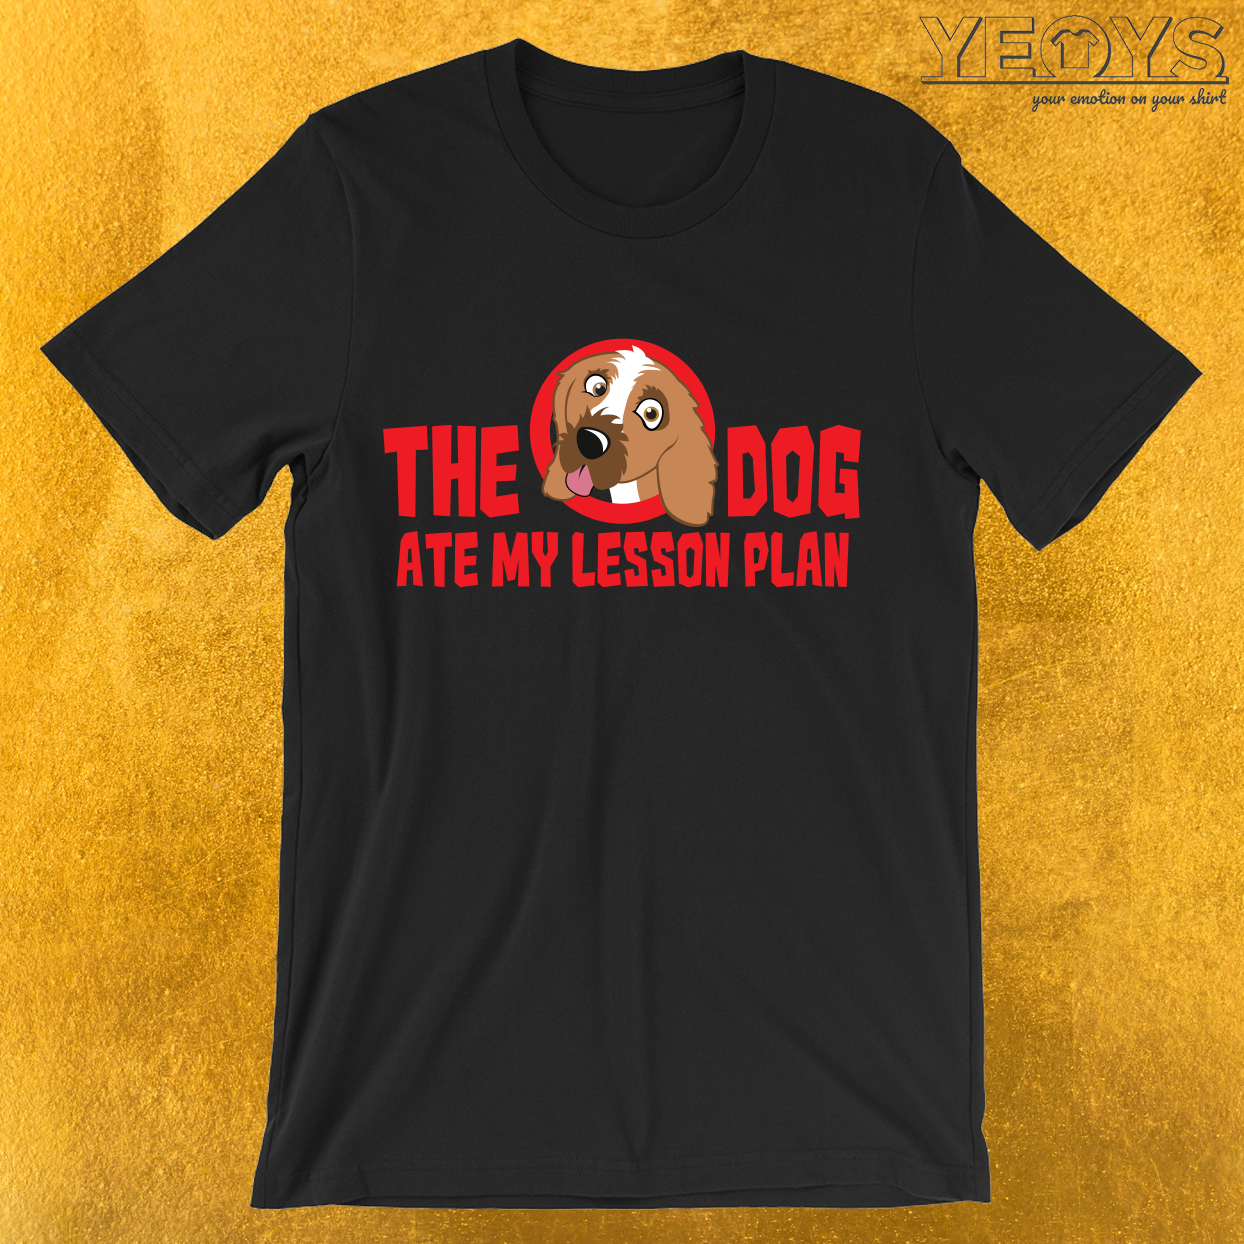 My Dog Ate My Lesson Plan T-Shirt